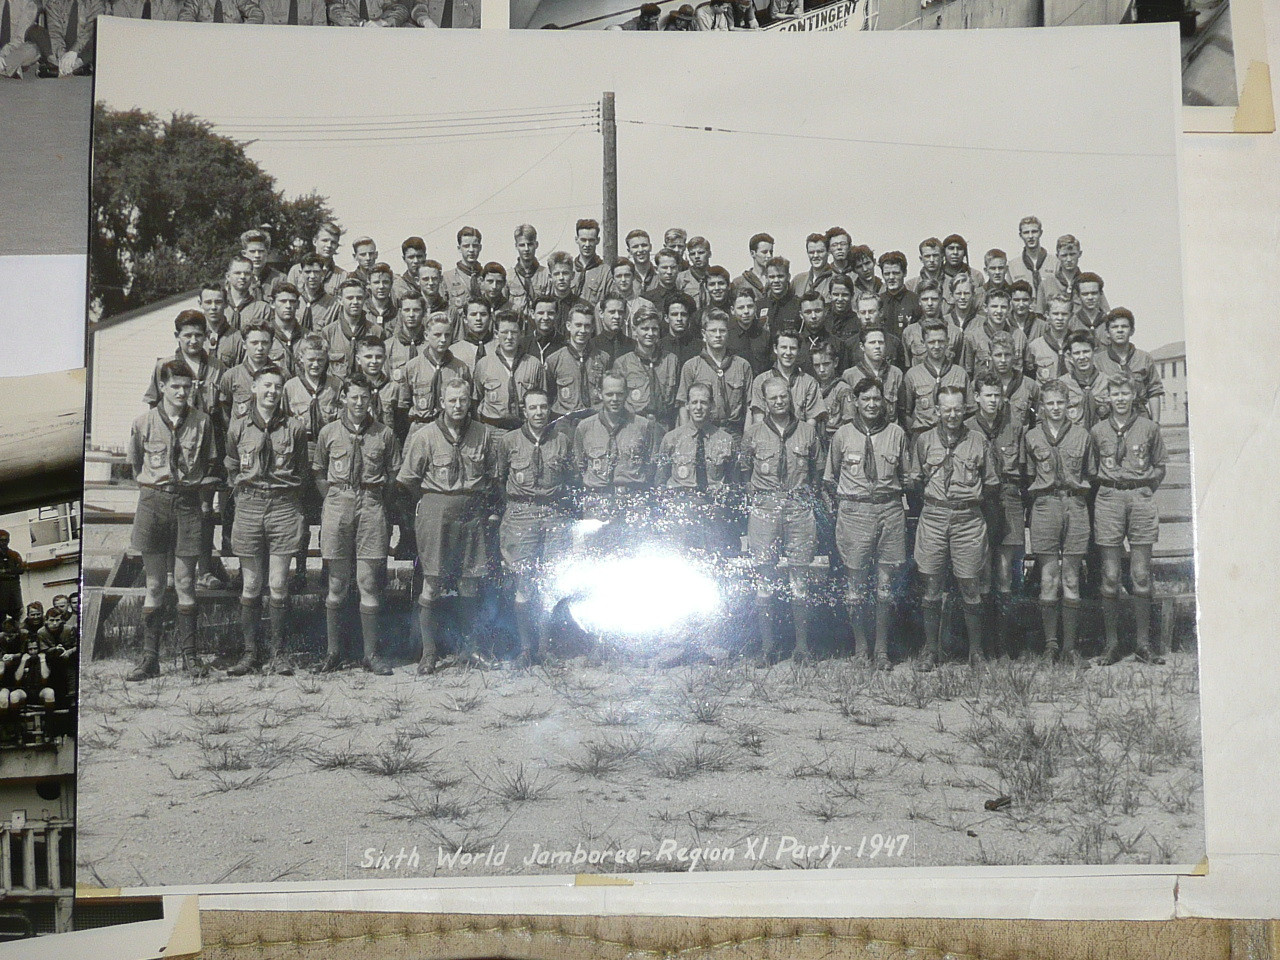 1947 World Jamboree, Great Group of 8 large images of some of the USA Contingent Scouts